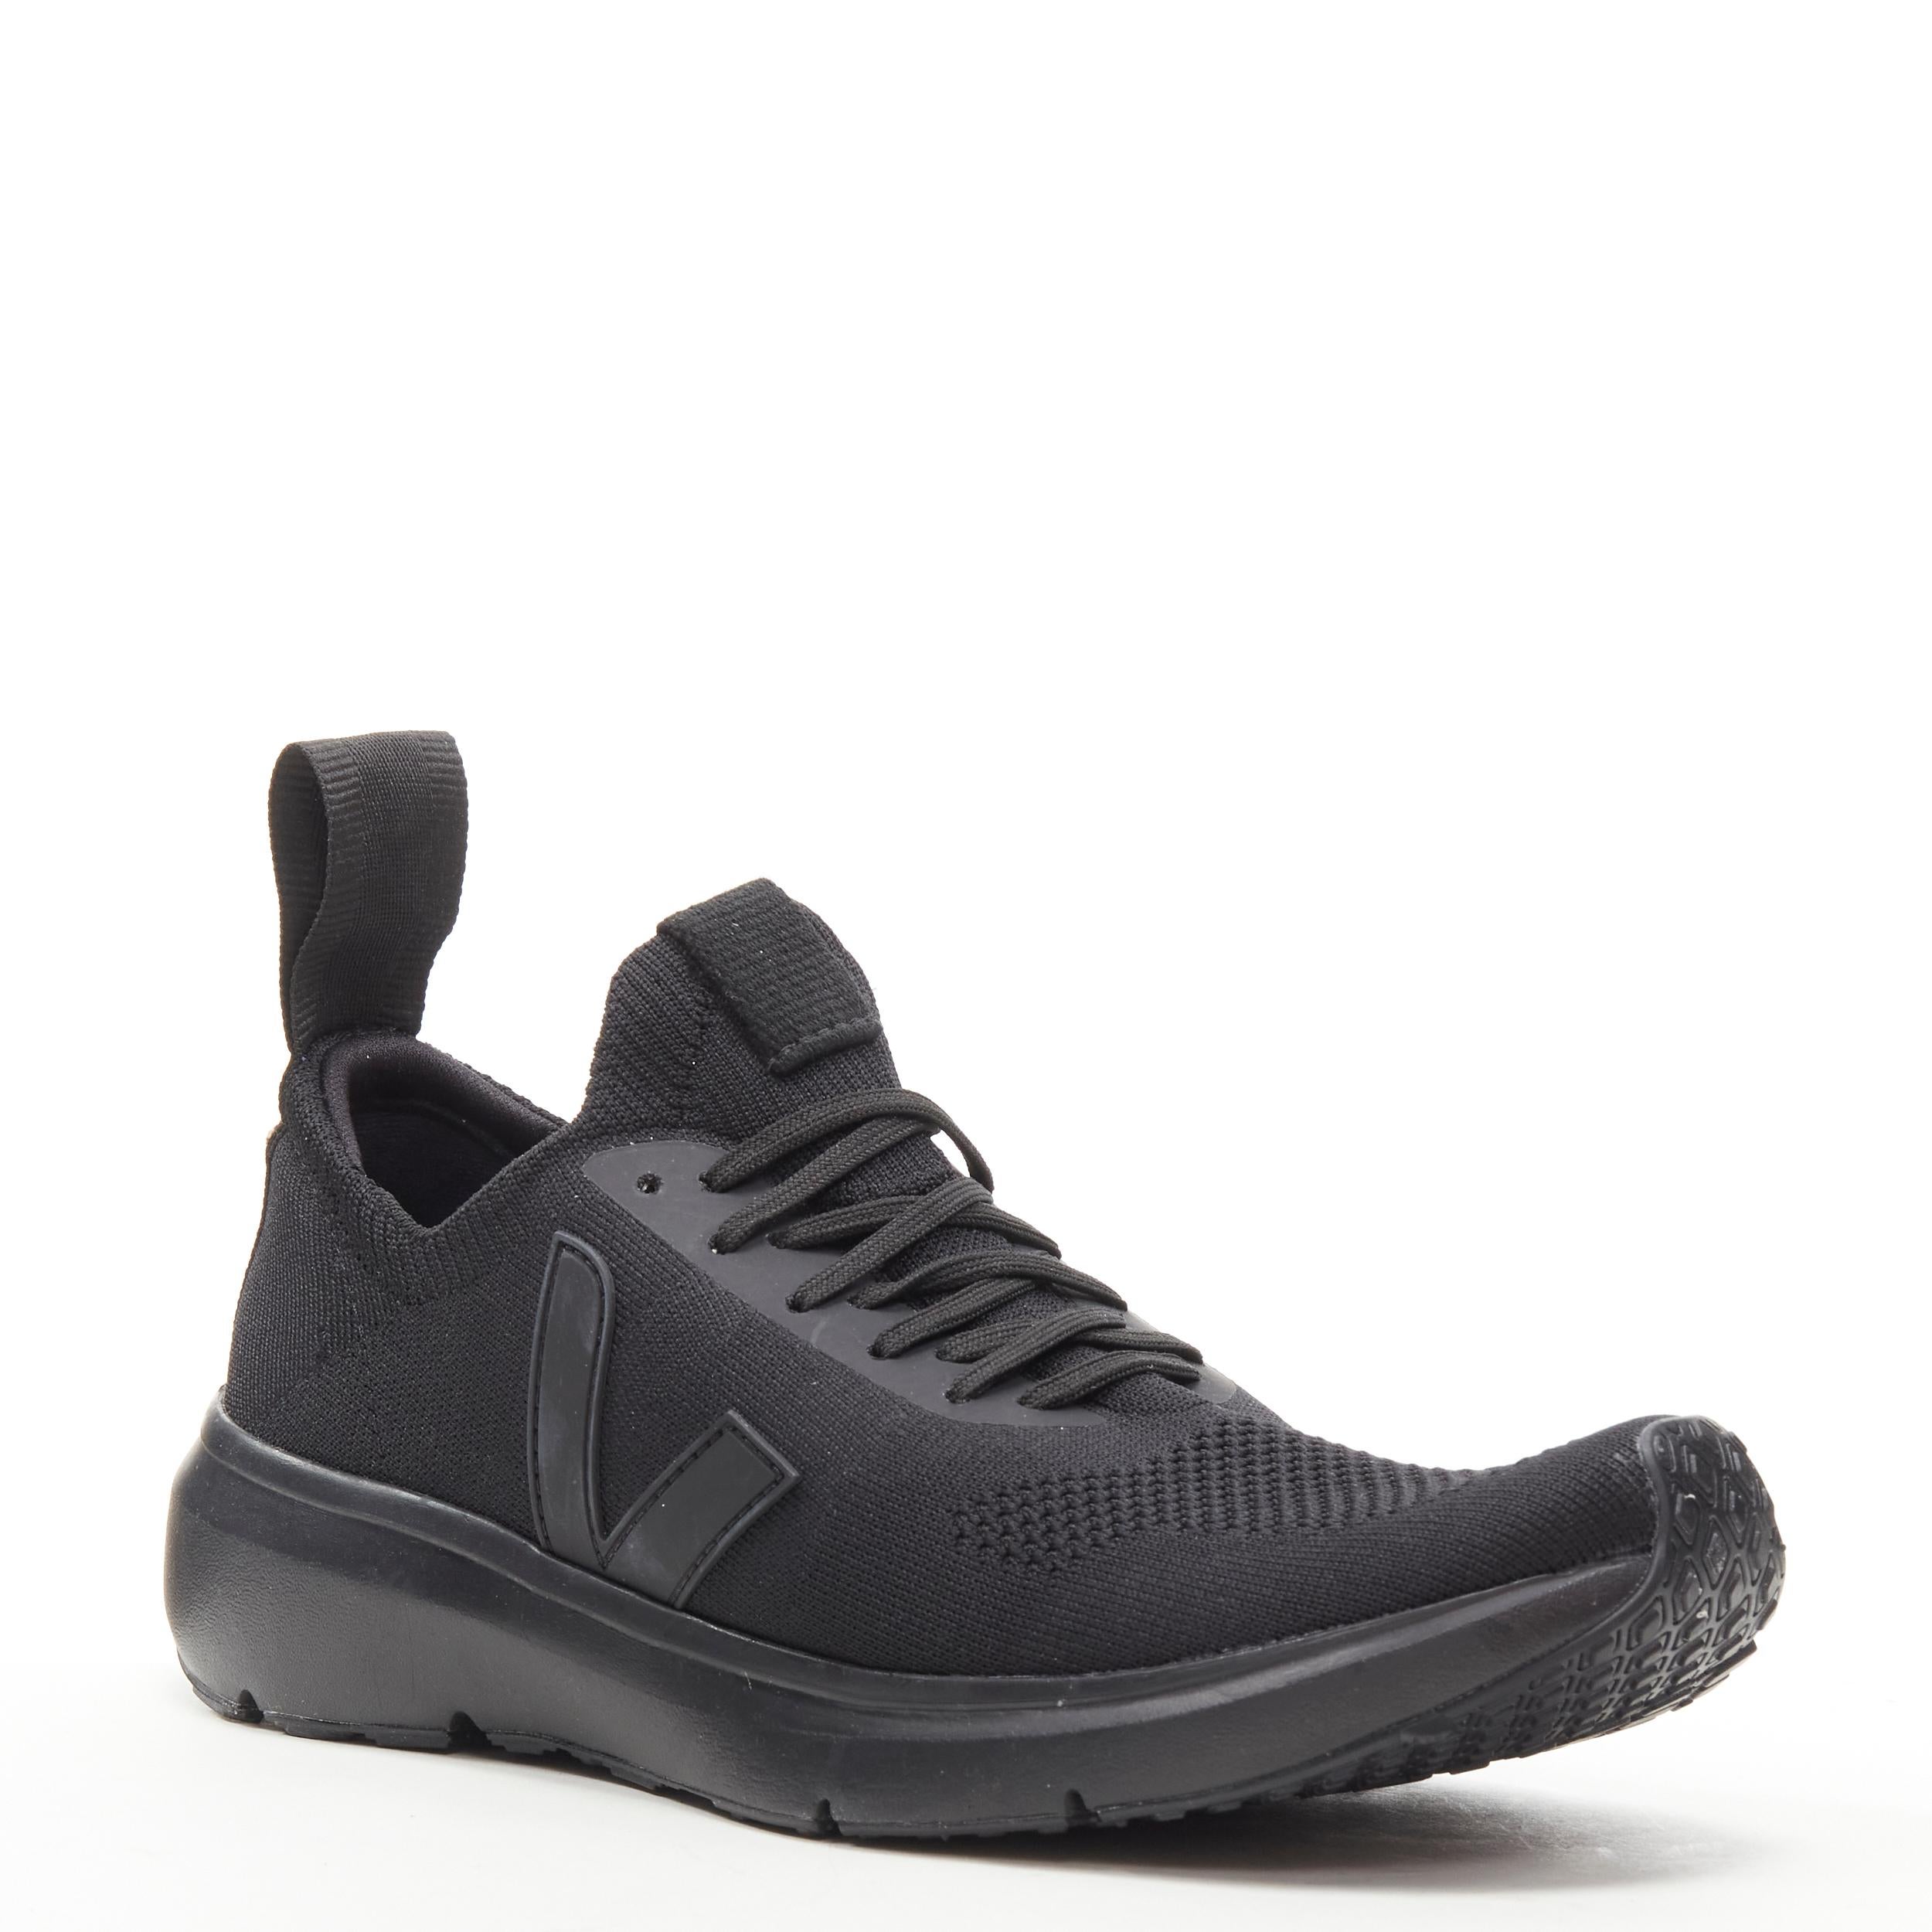 new RICK OWENS VEJA Runner Style 2 V-Knit Black sneaker EU41 
Reference: TGAS/C00631 
Brand: Rick Owens X Veja 
Designer: Rick Owens 
Model: Runner Style 2 V-Knit Collection: Veja collaboration Runway 
Material: Fabric 
Color: Black 
Pattern: Solid